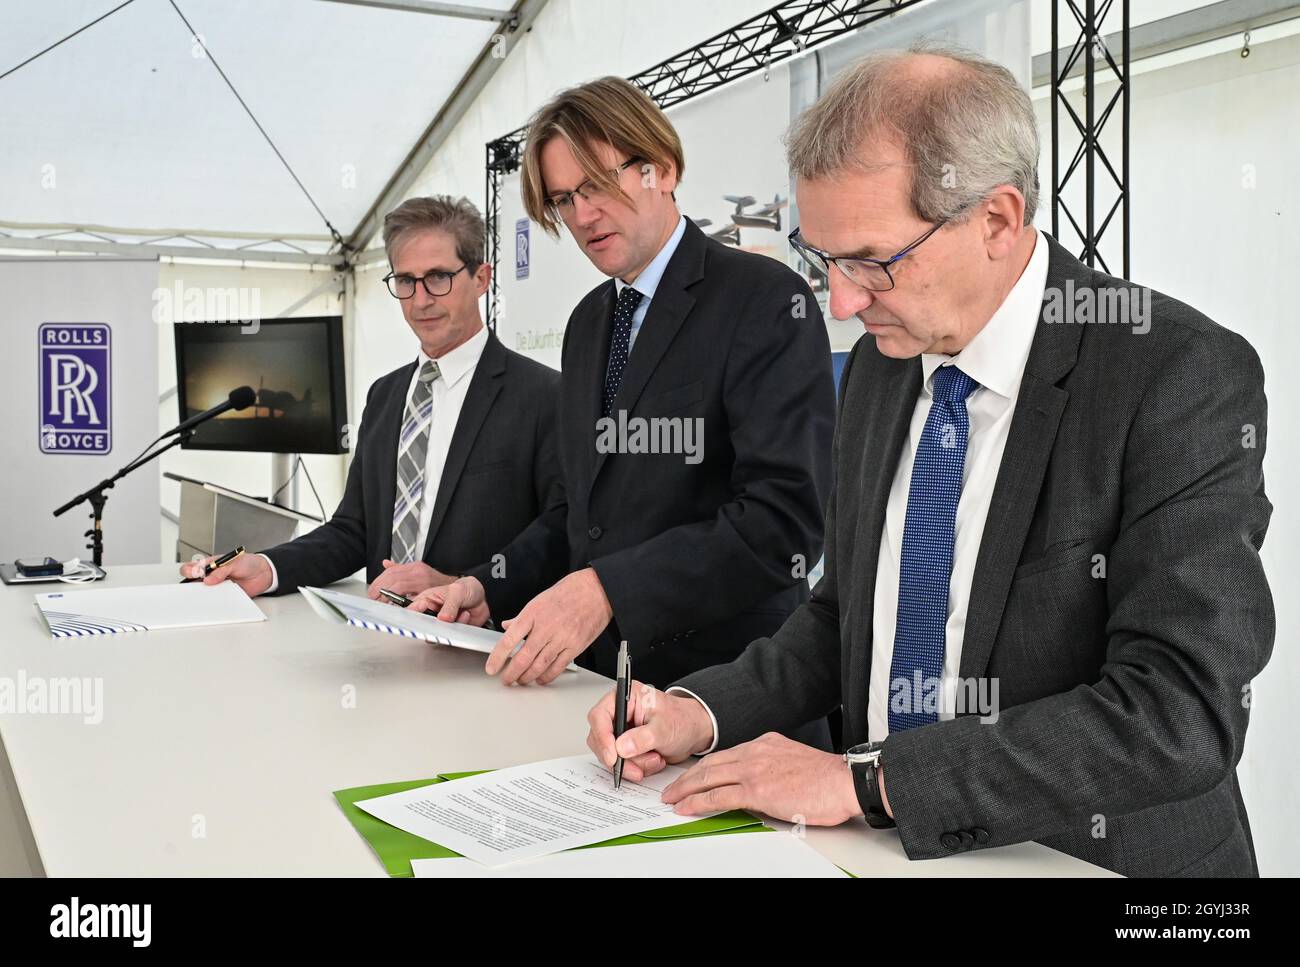 Cottbus, Germany. 08th Oct, 2021. Jörg Au (l), Managing Director Rolls-Royce Germany, Rob Watson (m), Head of Rolls-Royce Electrical and Hendrik Fischer, State Secretary at the Brandenburg Ministry of Economics, signing a Memorandum of Understanding to expand research and development capacity for hybrid-electric propulsion systems in Brandenburg. Rolls-Royce intends to drive forward the research and development of hybrid-electric propulsion systems for the next generation of aviation in Brandenburg. Credit: Patrick Pleul/dpa-Zentralbild/dpa/Alamy Live News Stock Photo